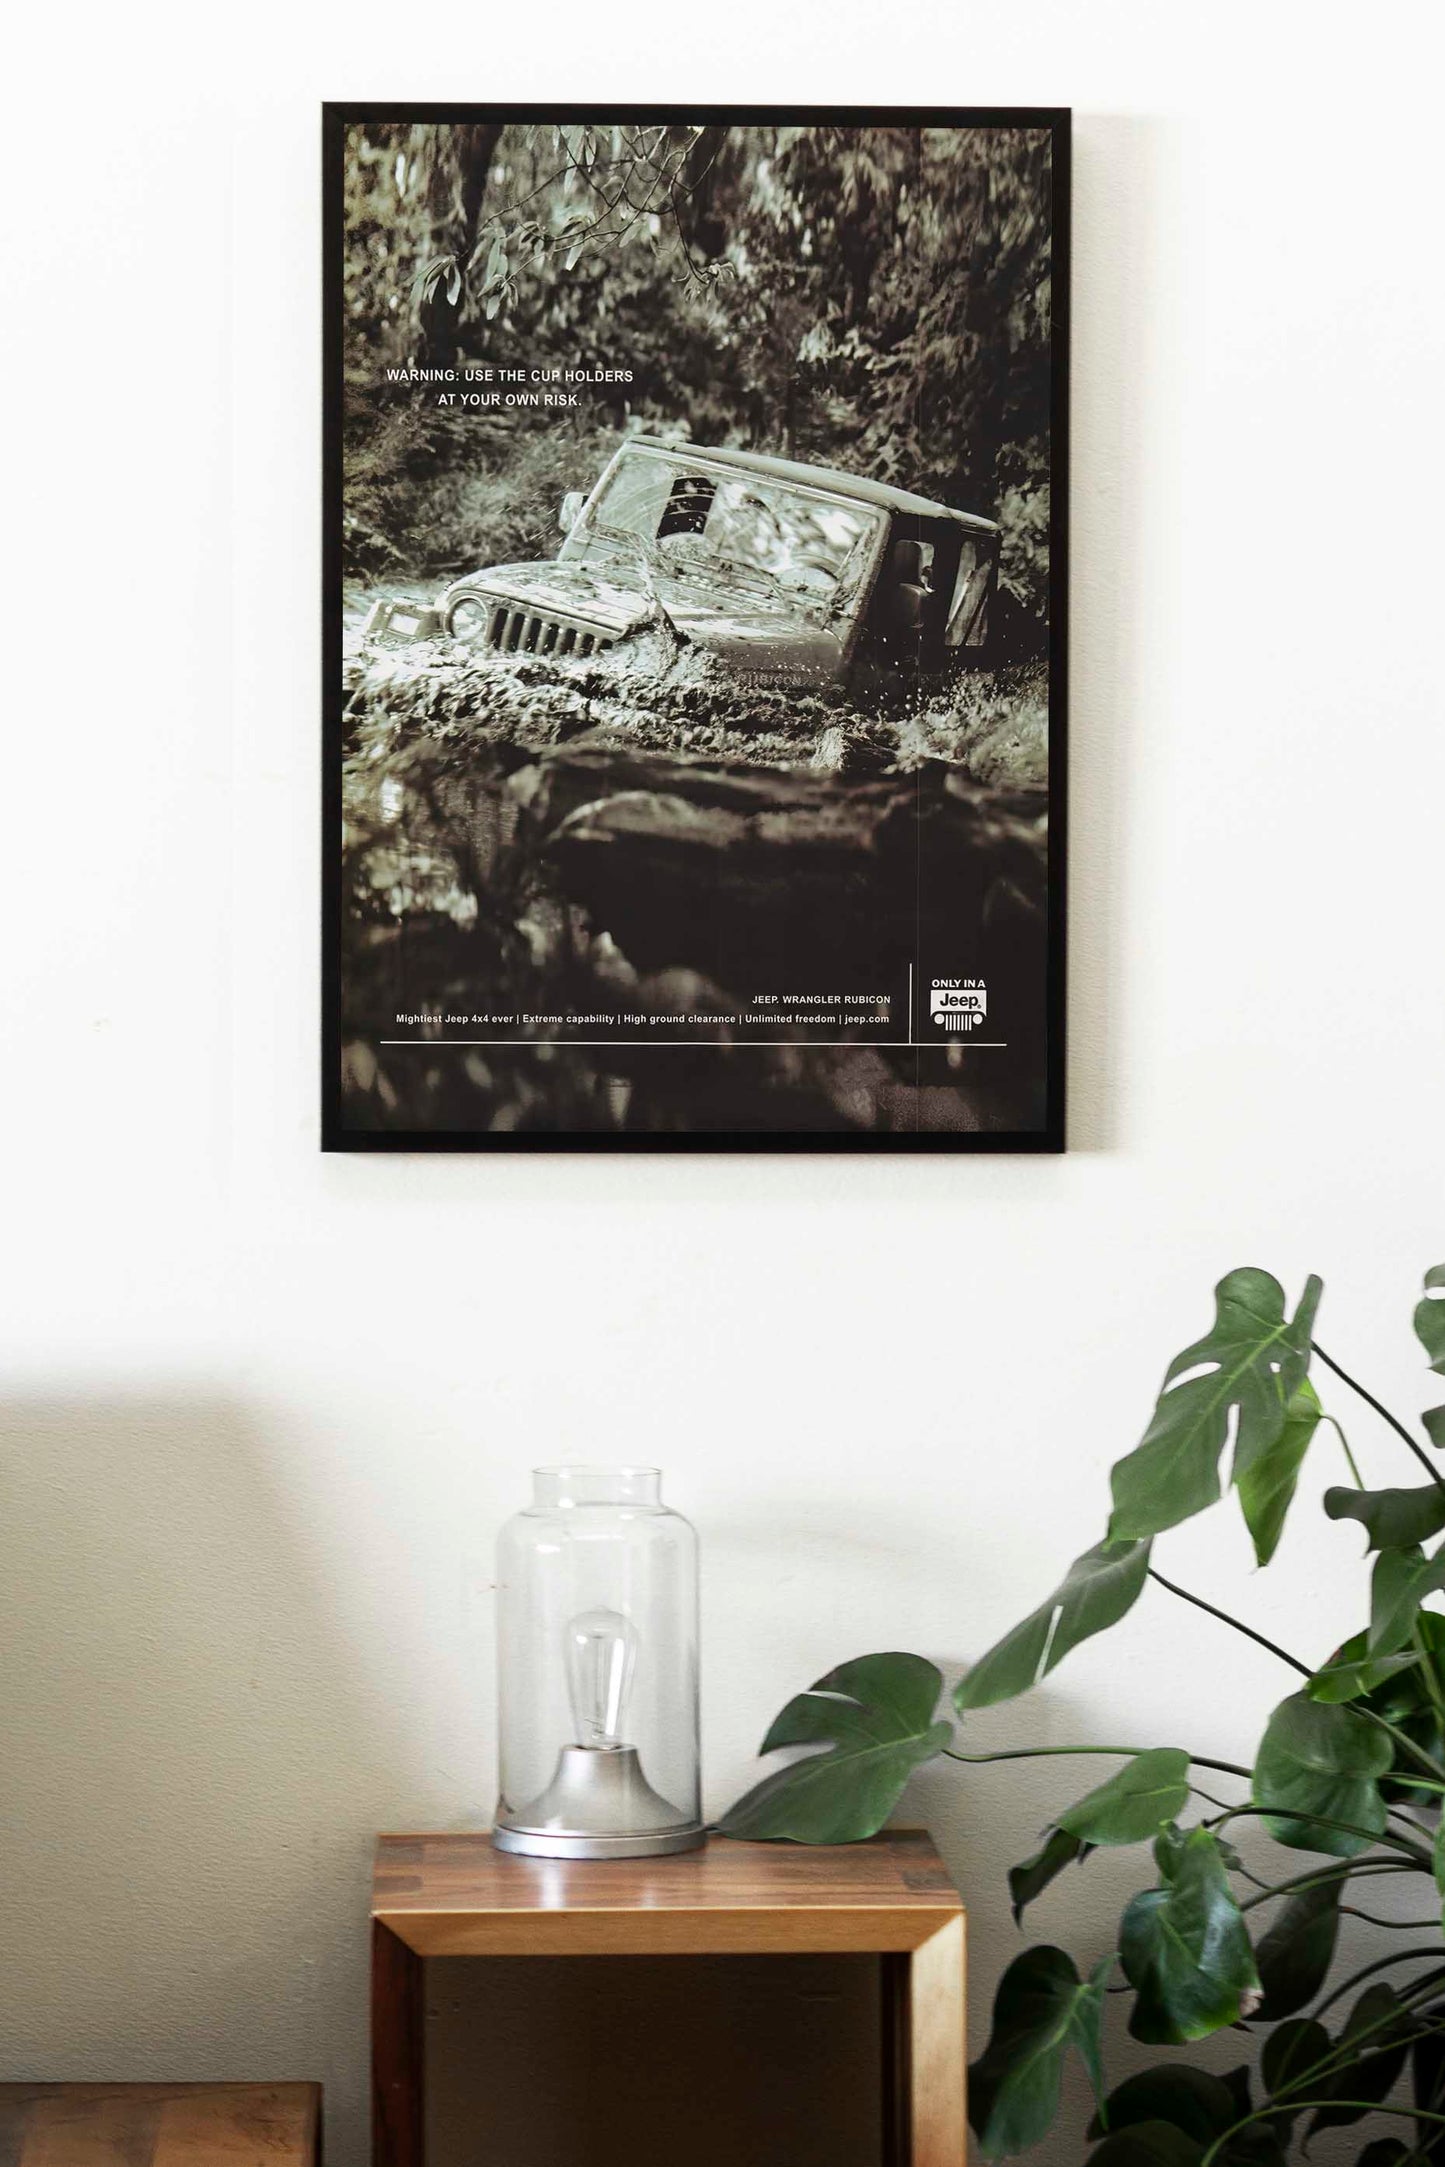 Jeep Poster